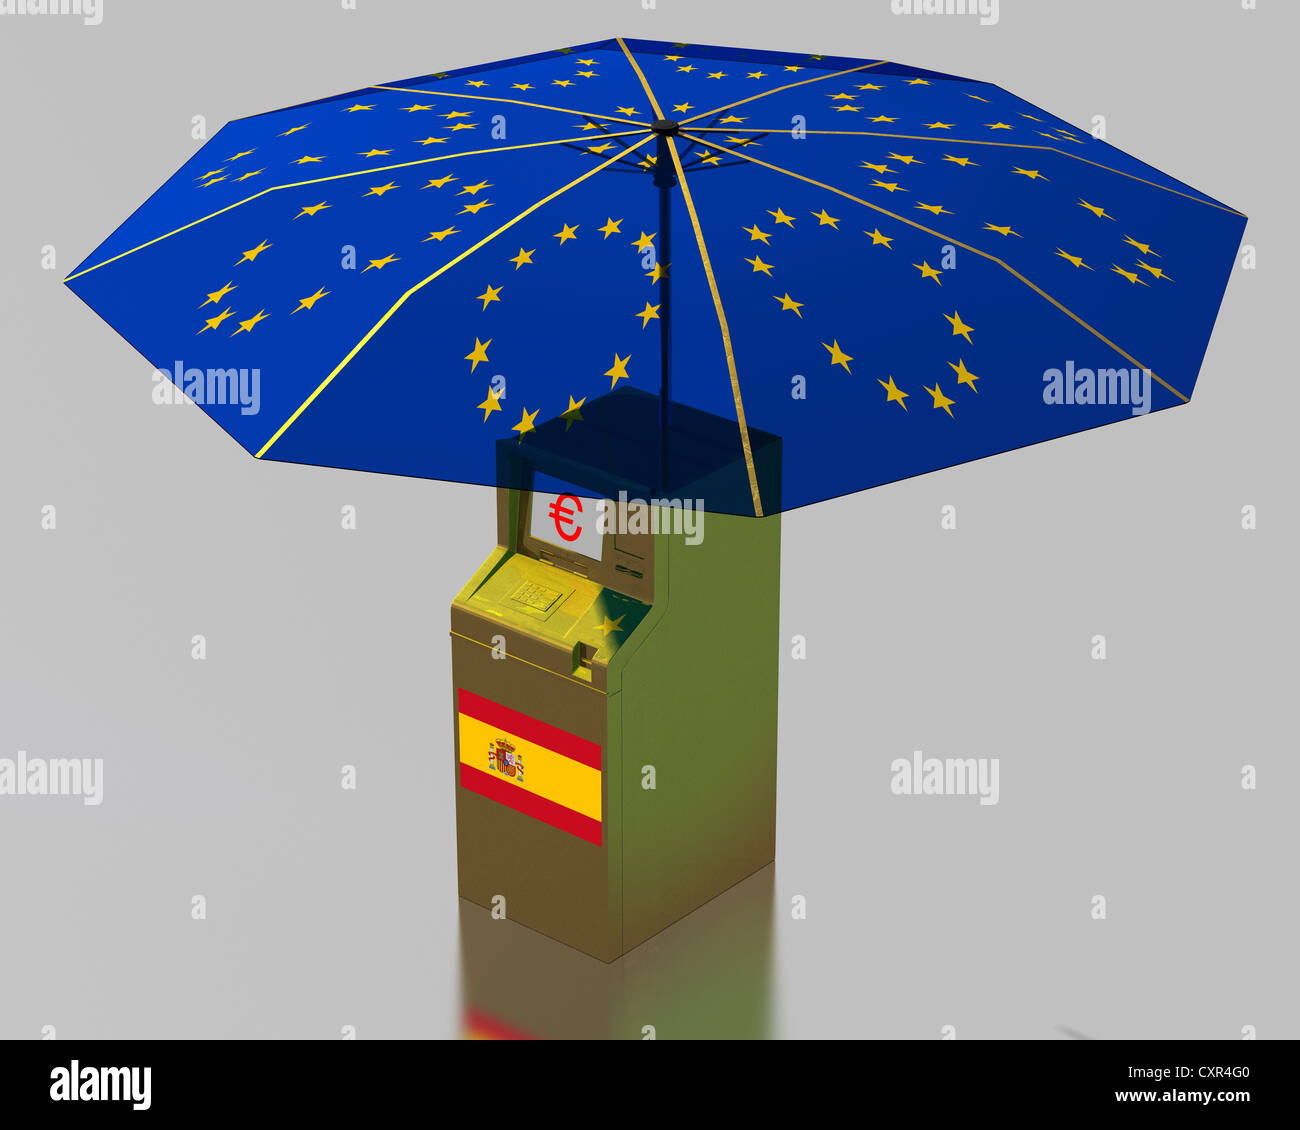 ATM with a Spanish flag beneath an umbrella with the stars of the EU, symbolic image for the euro rescue package for Spain Stock Photo